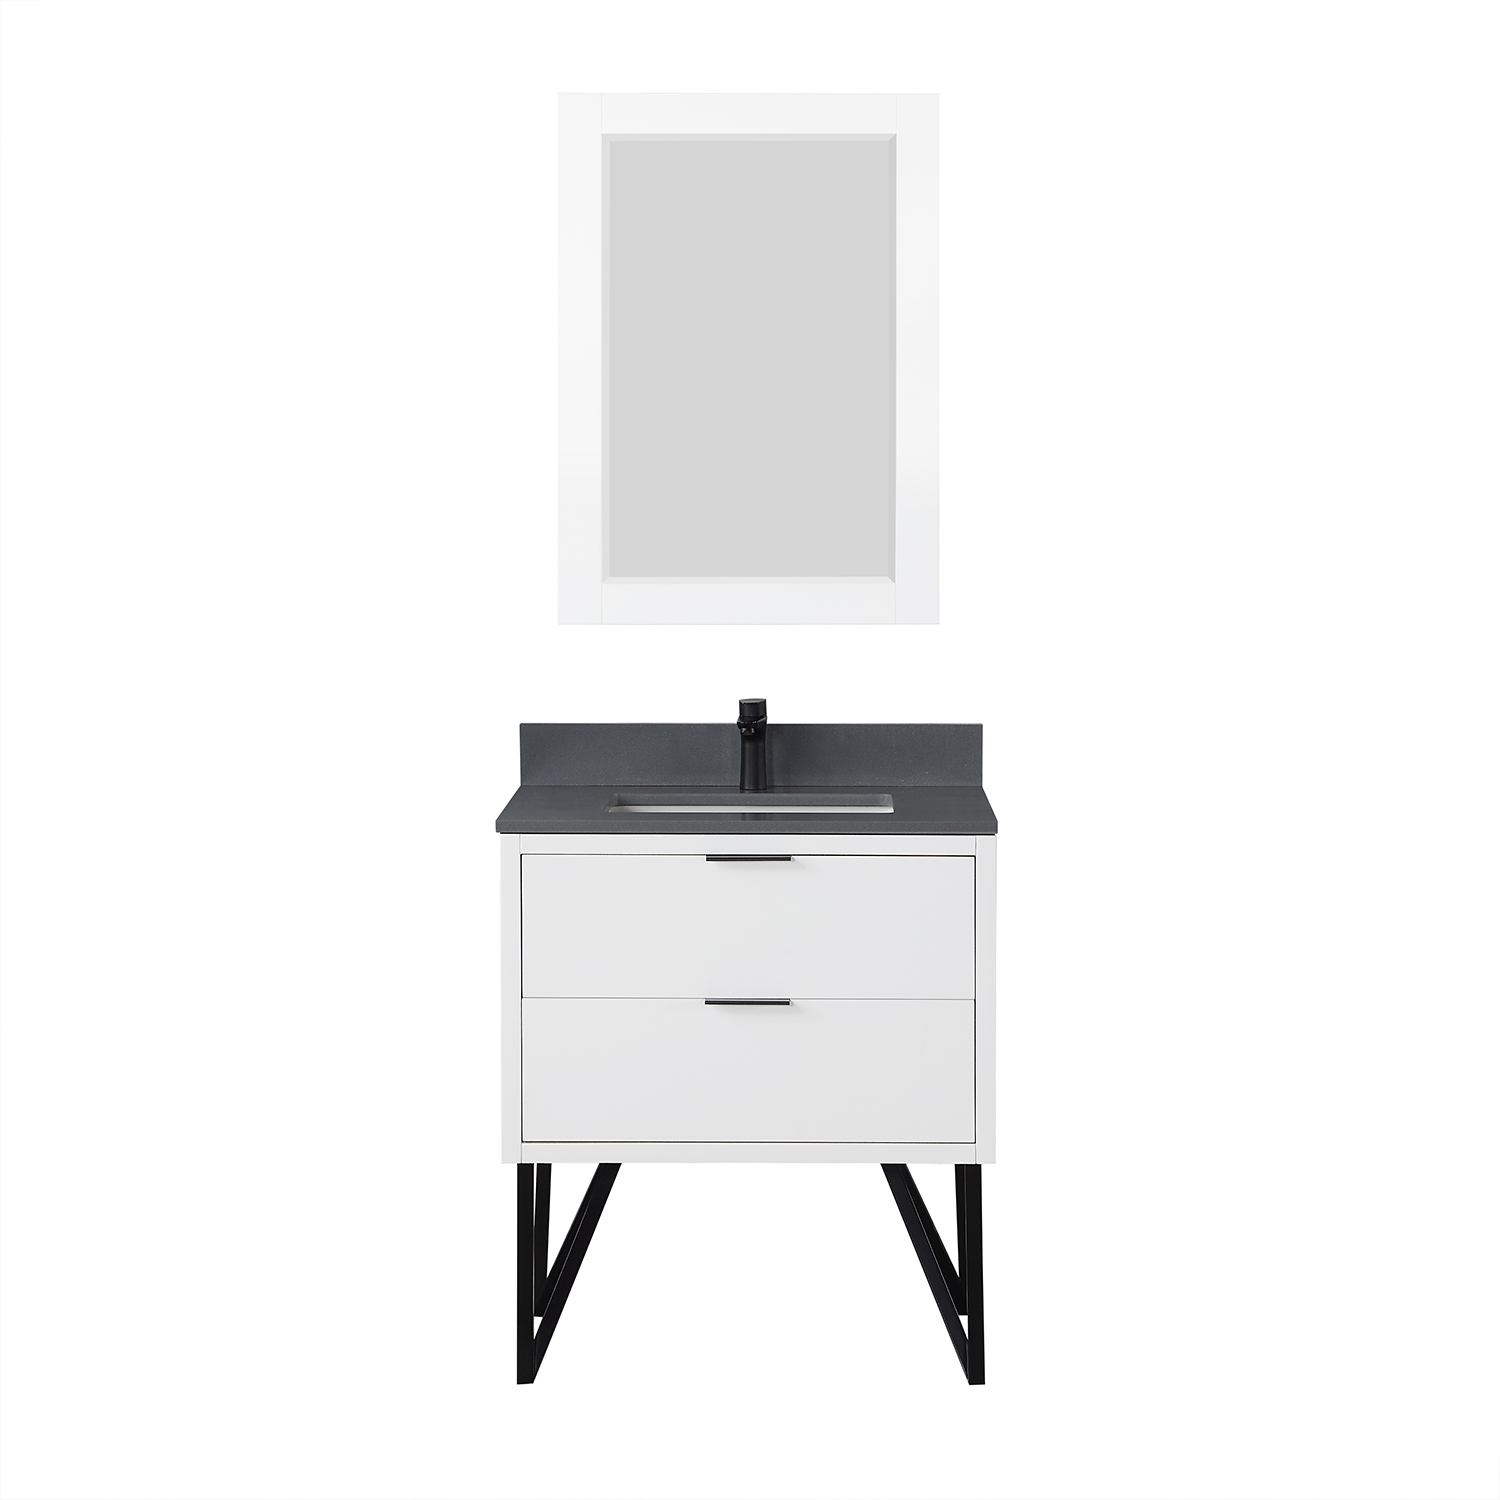 Issac Edwards Collection 30" Single Bathroom Vanity in White with Concrete Gray Composite Stone Countertop with Mirror 